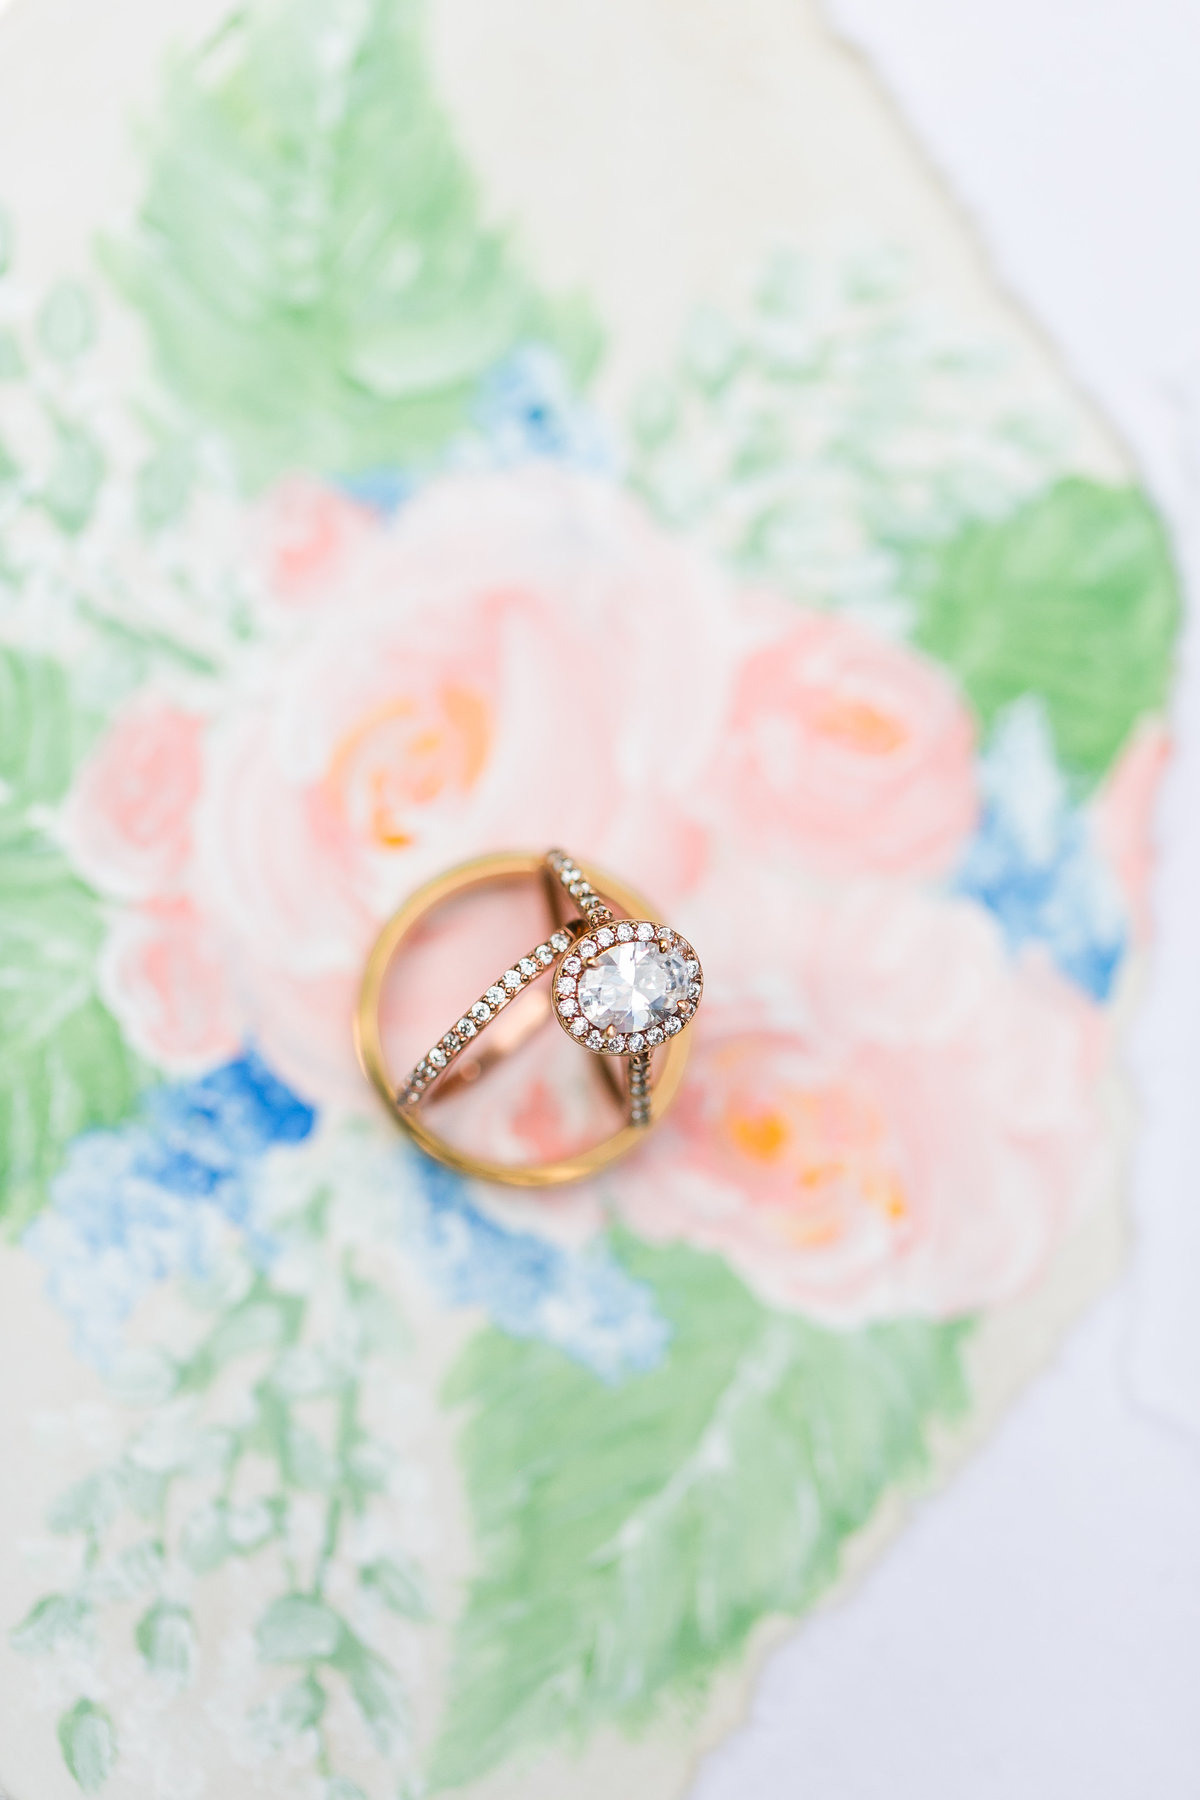 Ring shot on top of custom painted floral elements of invitation suite